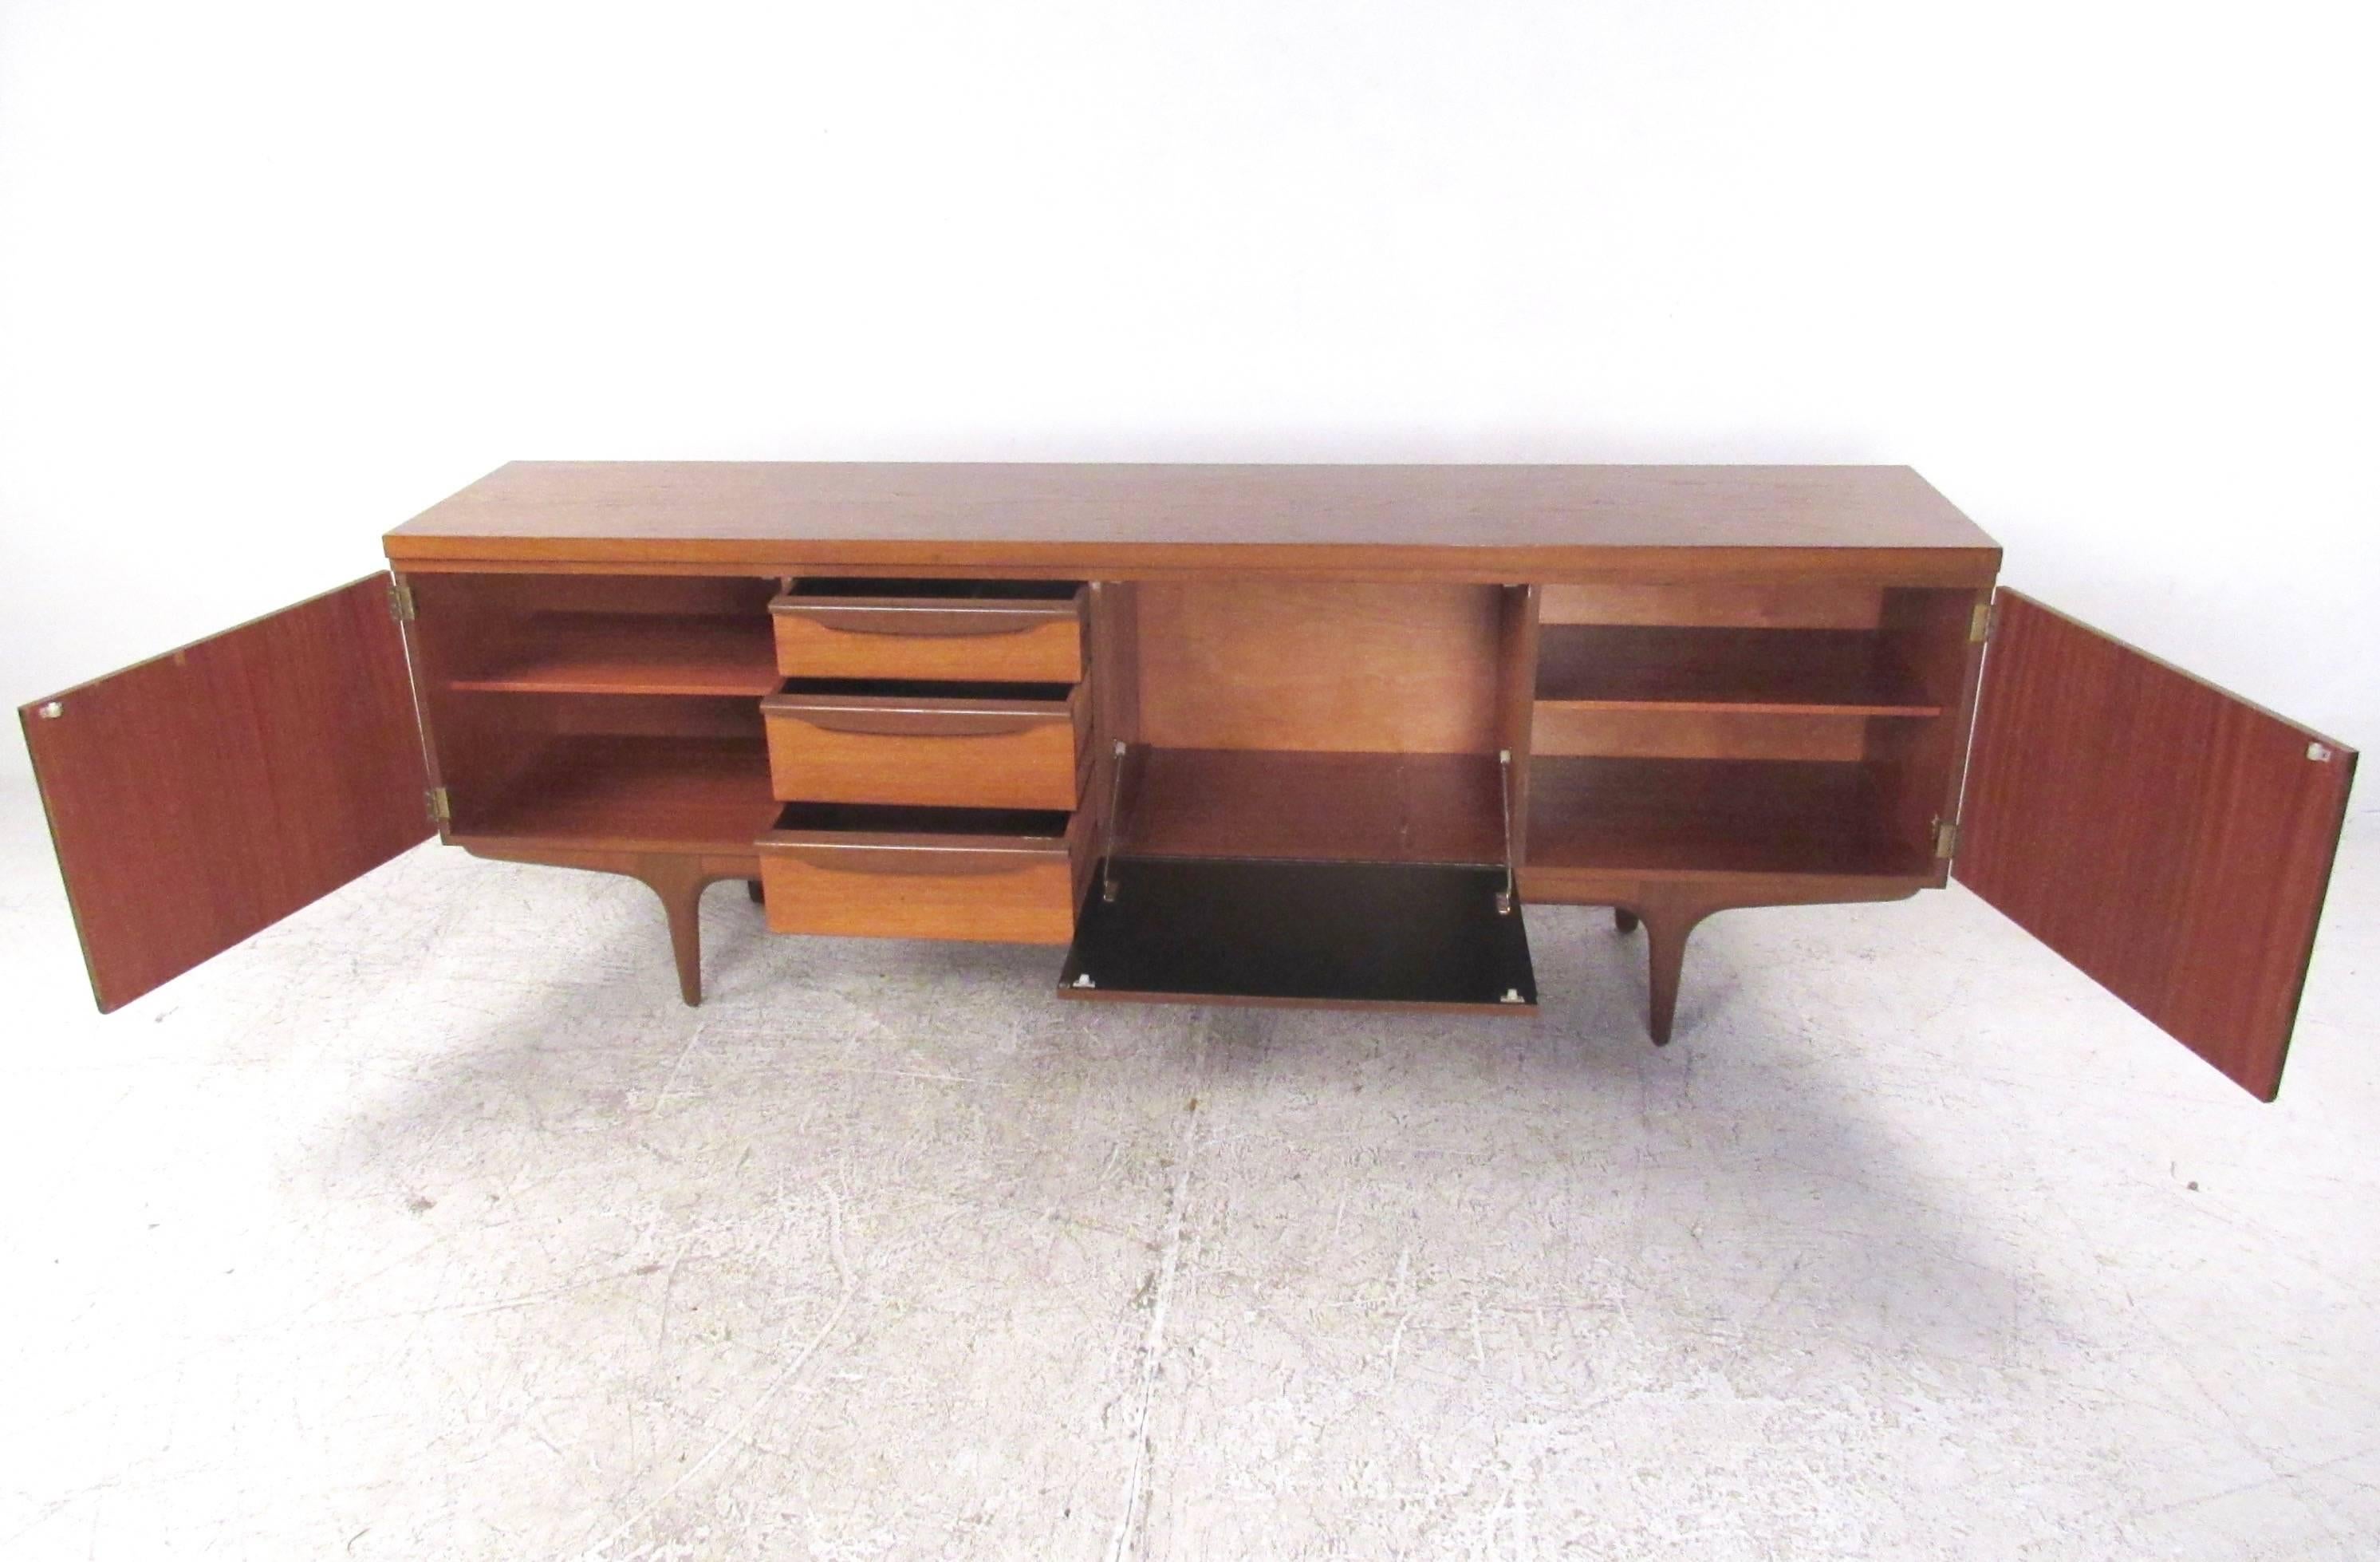 This beautiful vintage teak sideboard features stylish Mid-Century Modern design while offering plenty of storage. Unique carved handles and sturdy tapered legs make this Scandinavian modern server a unique addition to any interior. Please confirm